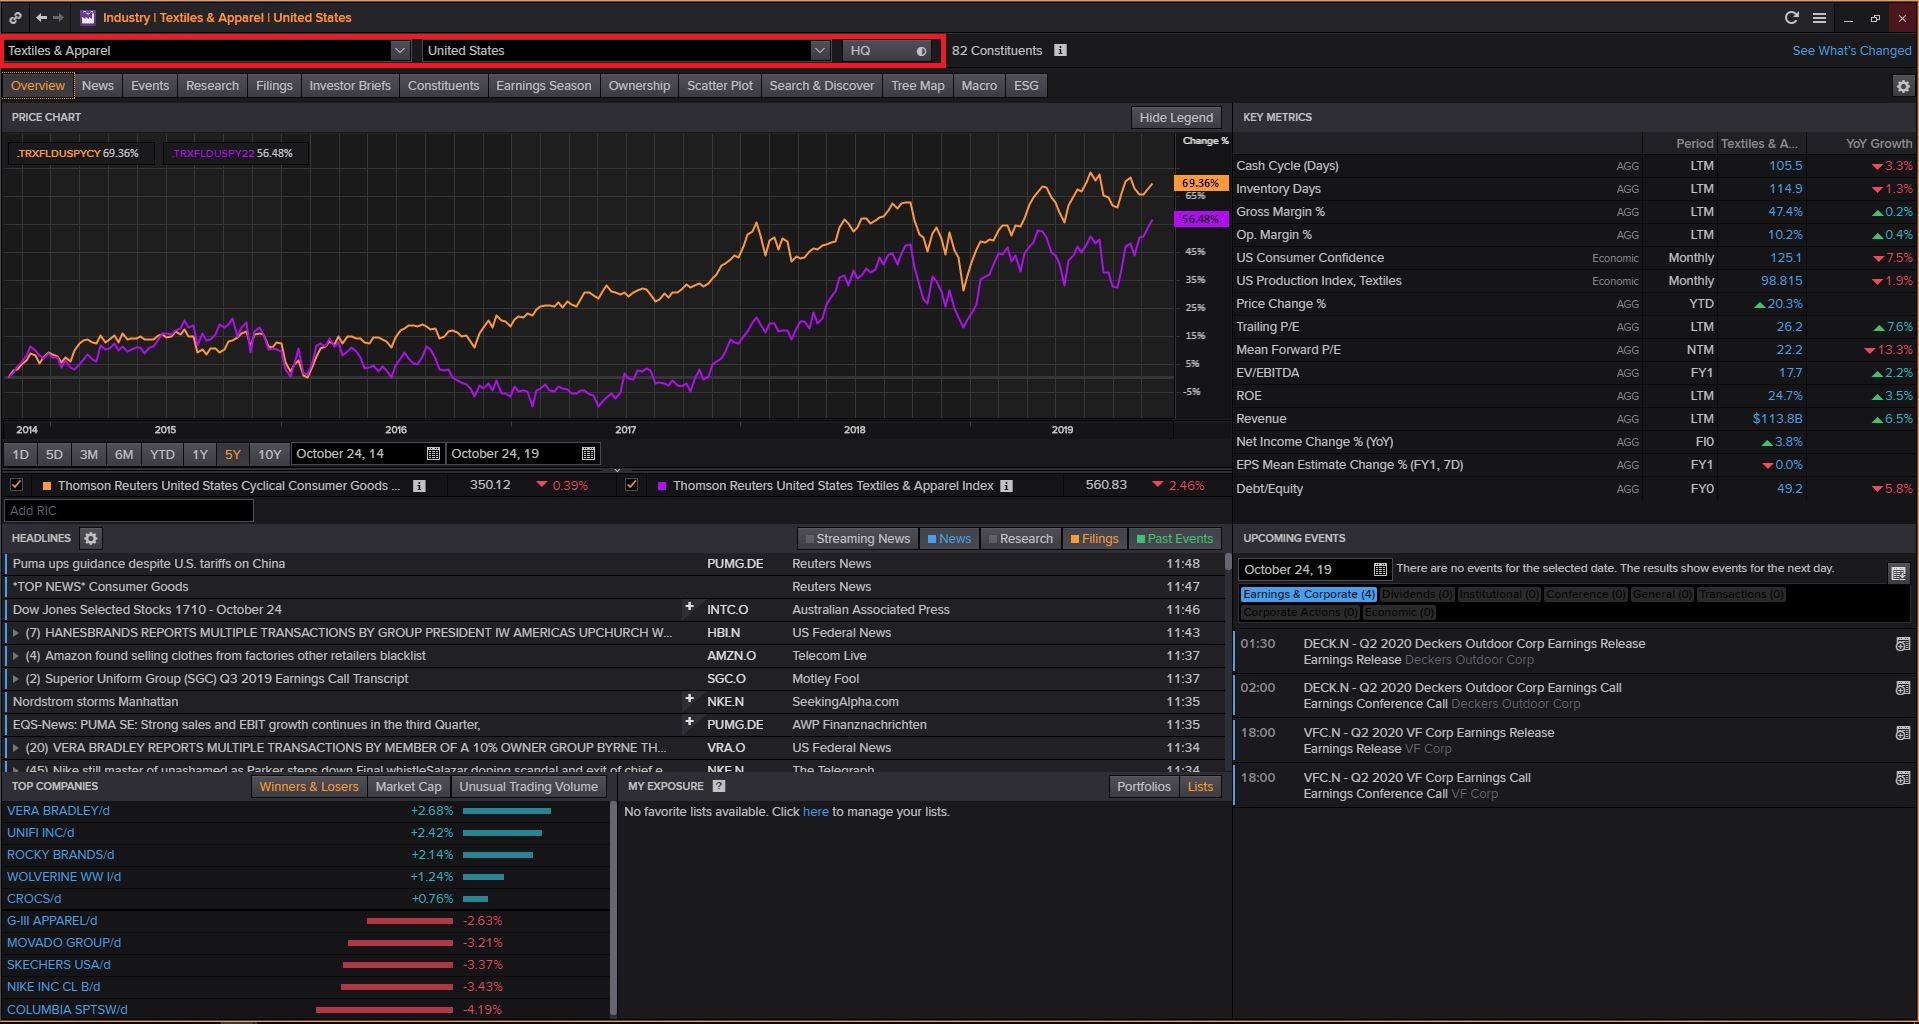 Login to Thomson Reuters Eikon (Available Only in Library) then Type INDUS and Search and Select Consumer Cyclicals and Click on Cyclical Consumer Products and Click on Textiles & Apparel and Select Country